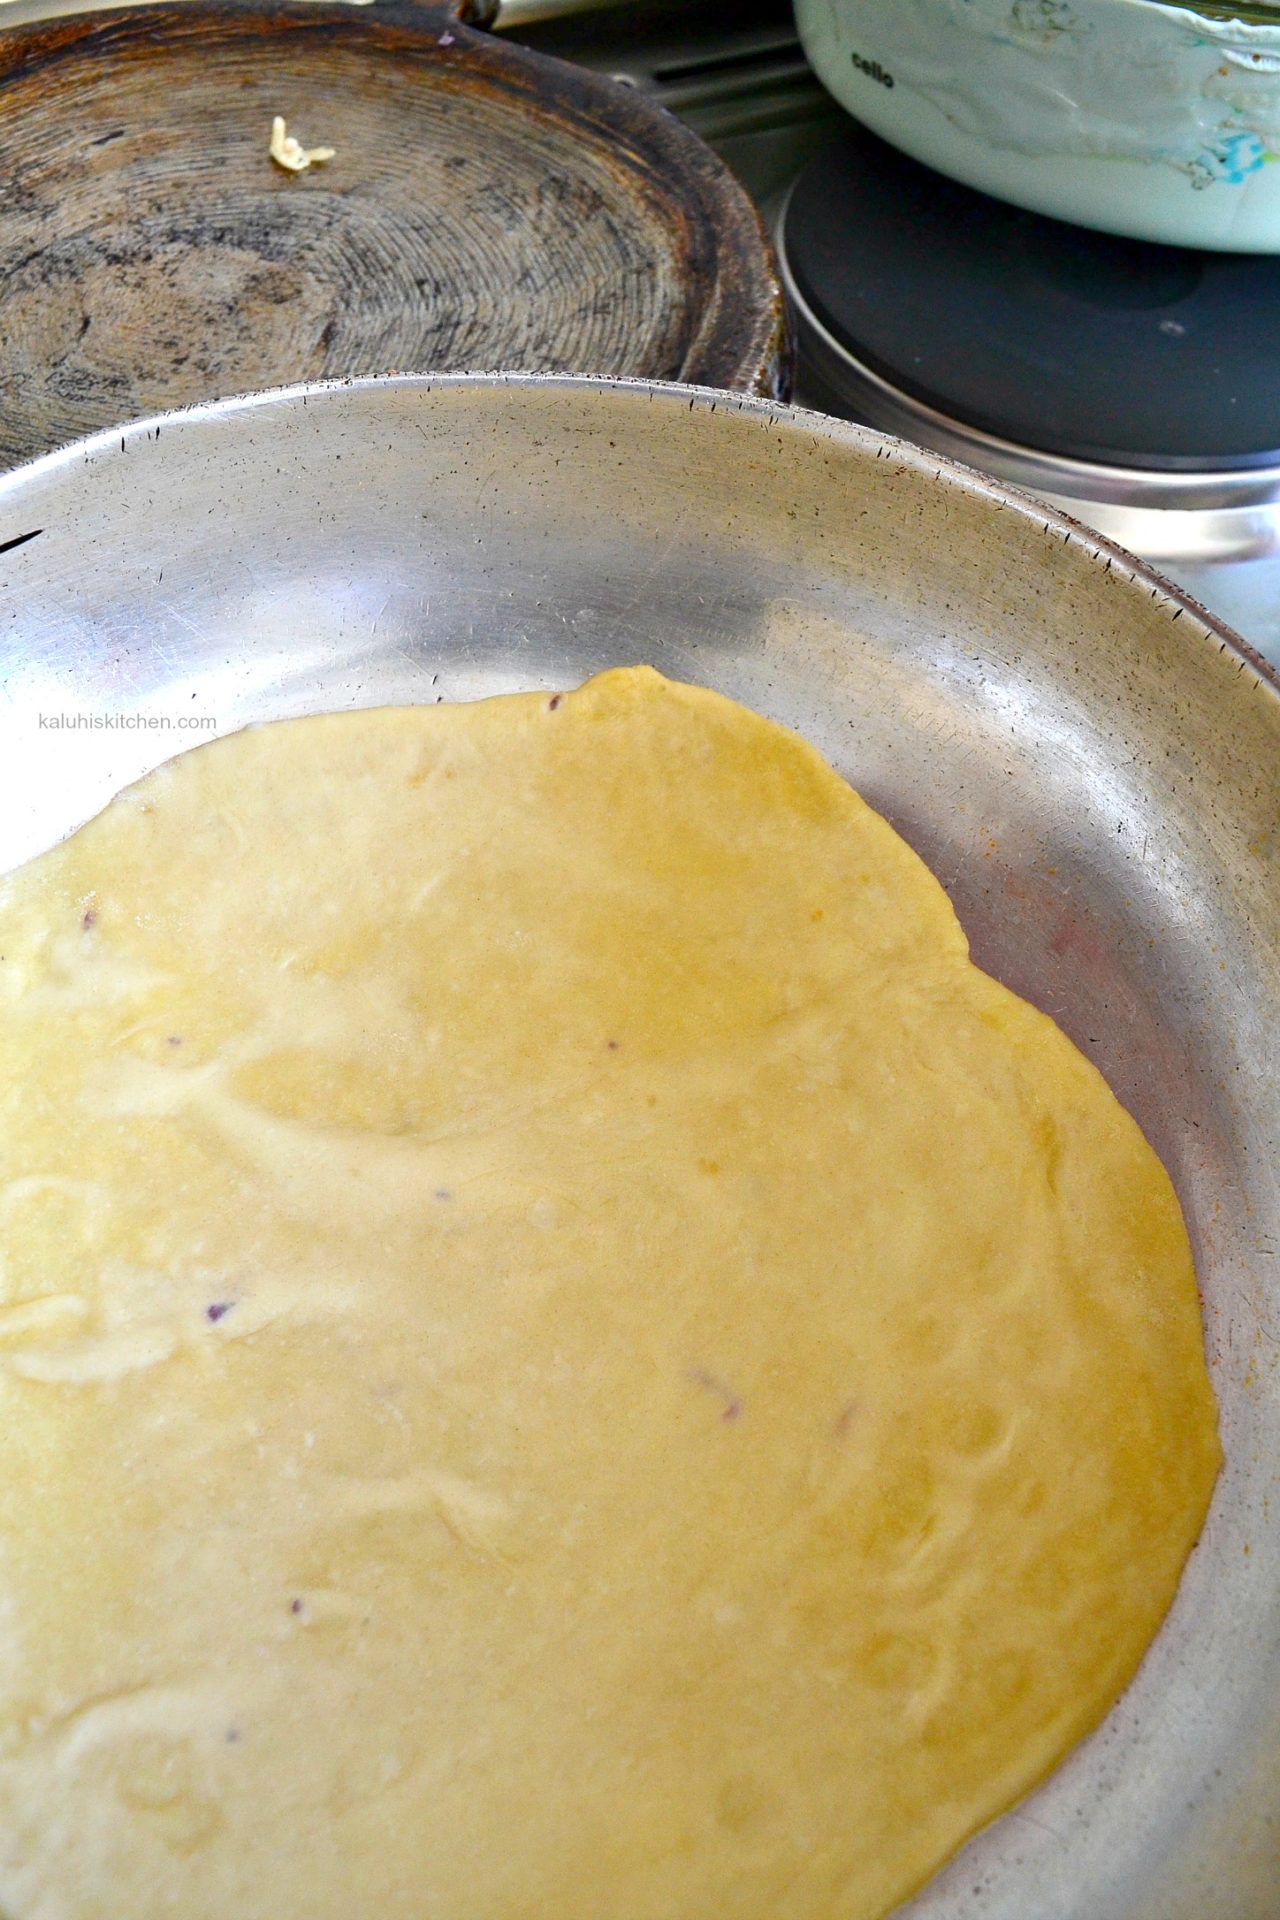 allow each side to have 2-3 minutes on the pan. This allows the chapati to cook through and get a nice golden crust_kaluhiskitchen.com